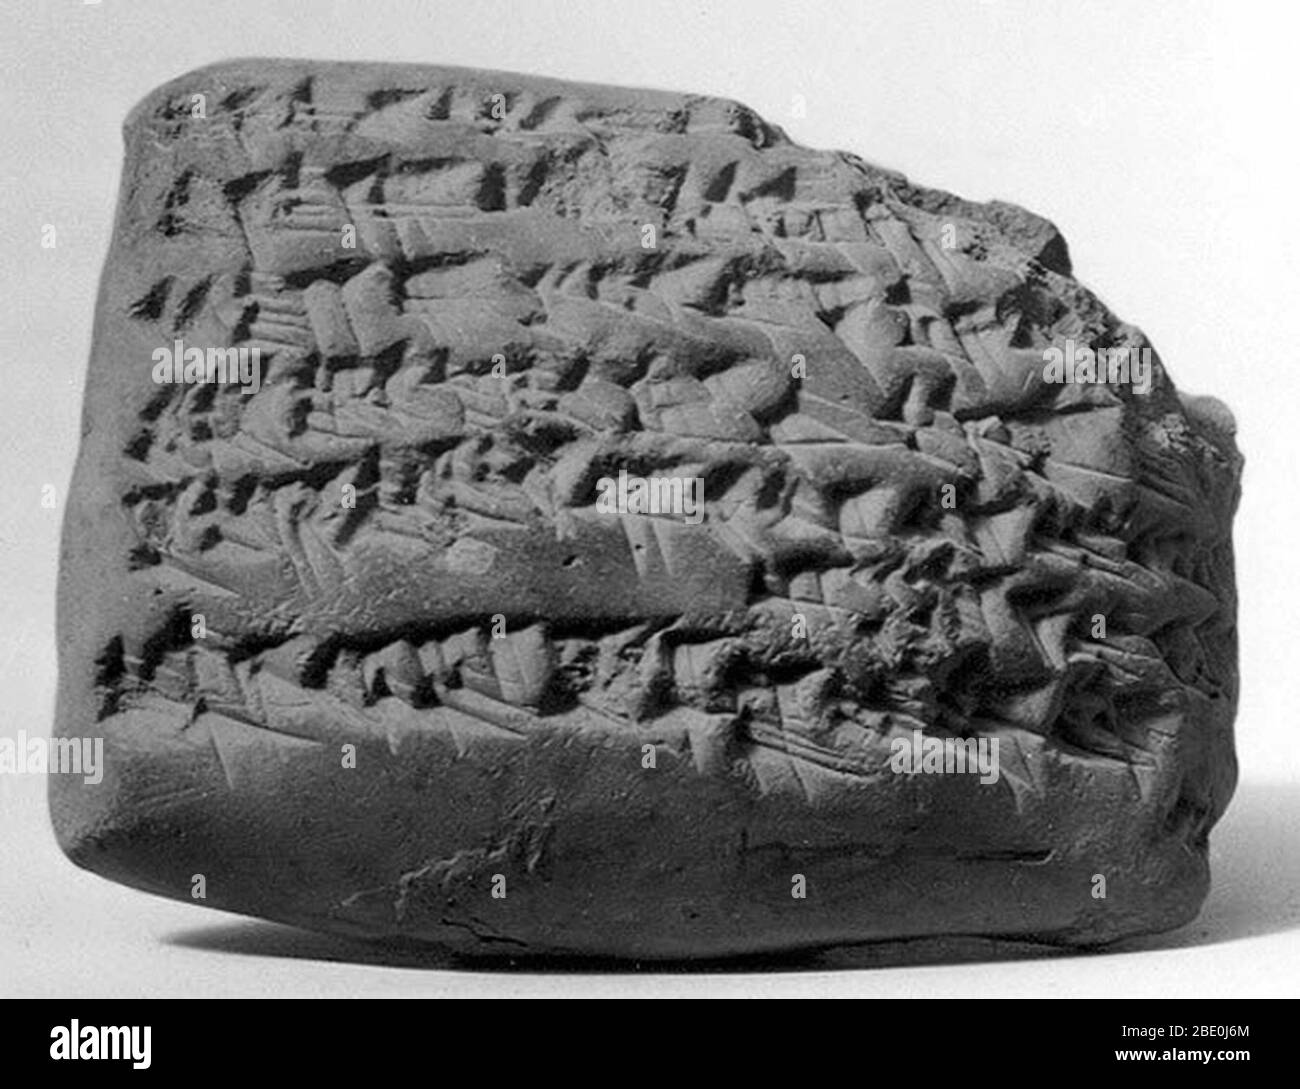 Cuneiform tablet. Gula incantation. Neo-Babylonian or Achaemenid, ca. mid- to late 1st millennium B.C. Probably from Sippar (modern Tell Abu Habba) in Mesopotamia. Proto-cuneiform is the name given to the earliest form of writing -- pictograms that were drawn on clay tablets. Gradually, the pictograms became abstracted into cuneiform (Latin, 'wedge-shaped') signs that were impressed rather than drawn. At its greatest extent, cuneiform writing was used from the Mediterranean coast of Syria to western Iran and from Hittite Anatolia to southern Mesopotamia. It was adapted to write at least fiftee Stock Photo